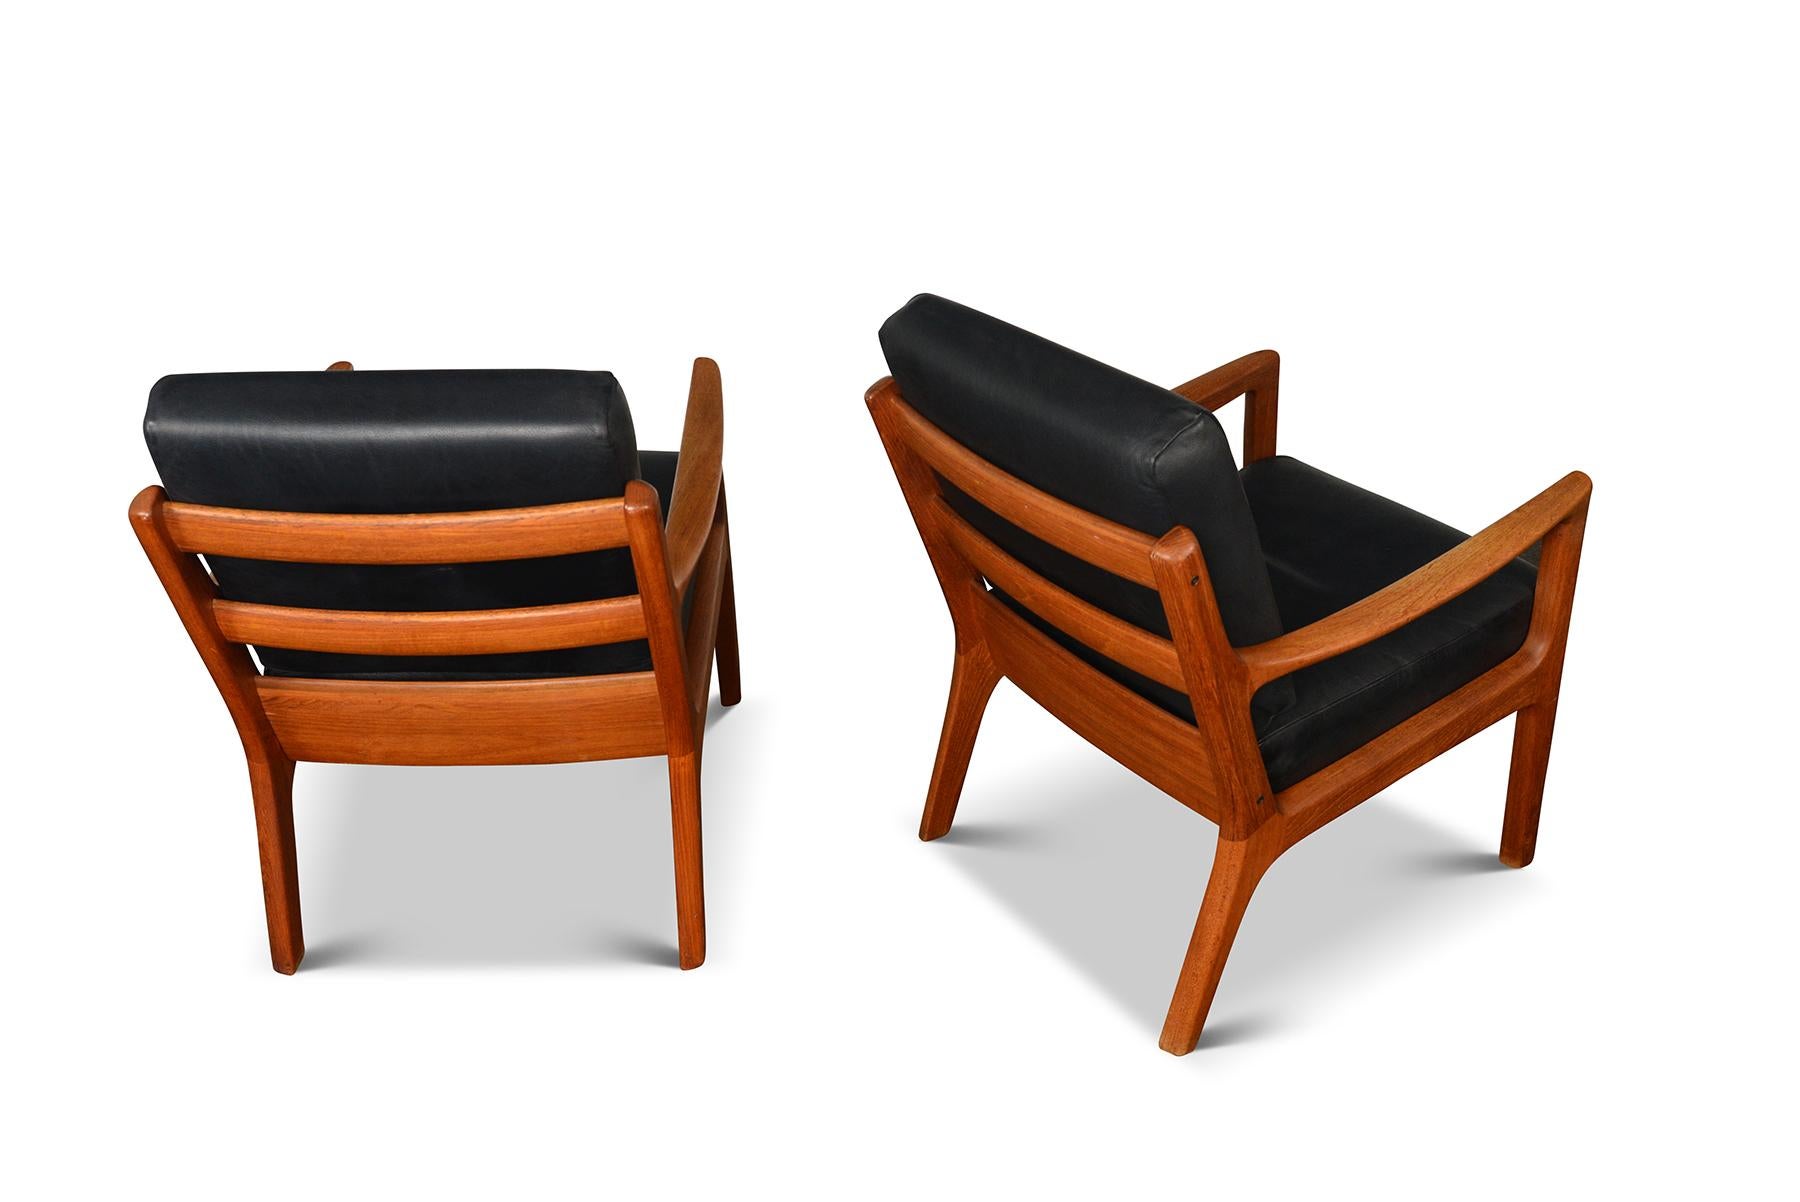 Pair of Ole Wanscher Senator Lounge Chairs in Teak + Black Leather #2 2